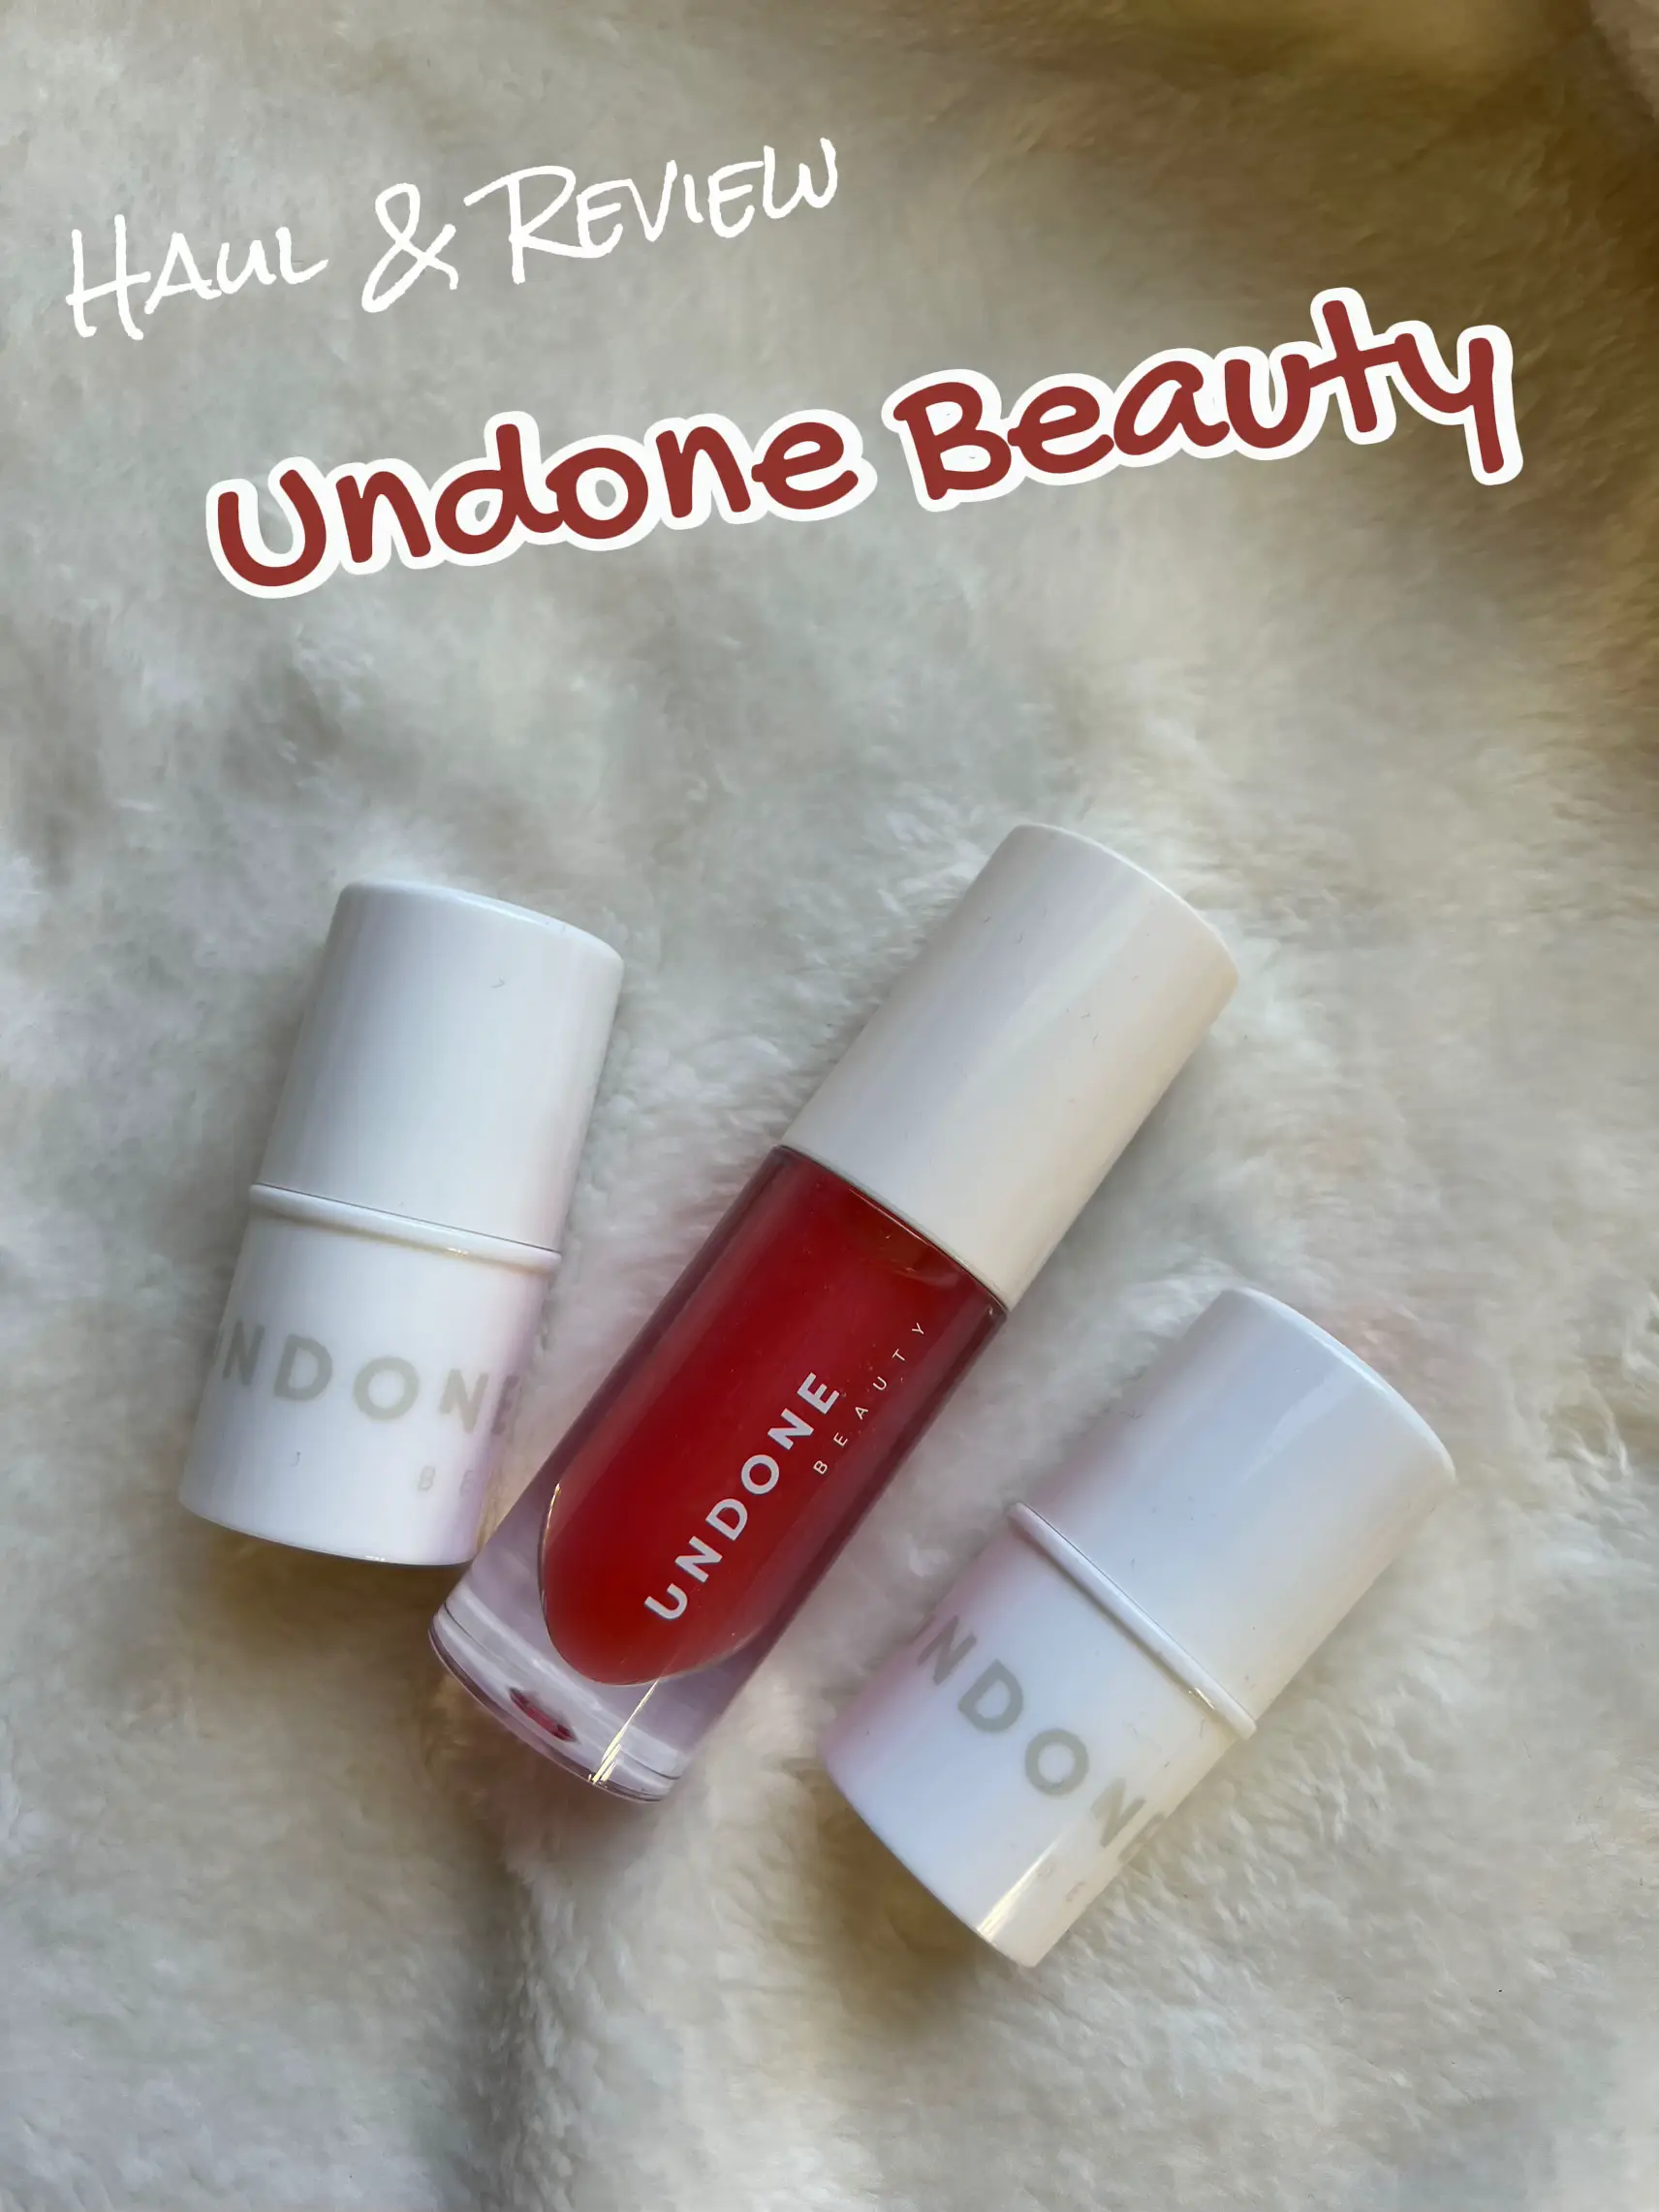 Undone Beauty Sheer Radiance Serum Tint  Anthropologie Taiwan - Women's  Clothing, Accessories & Home